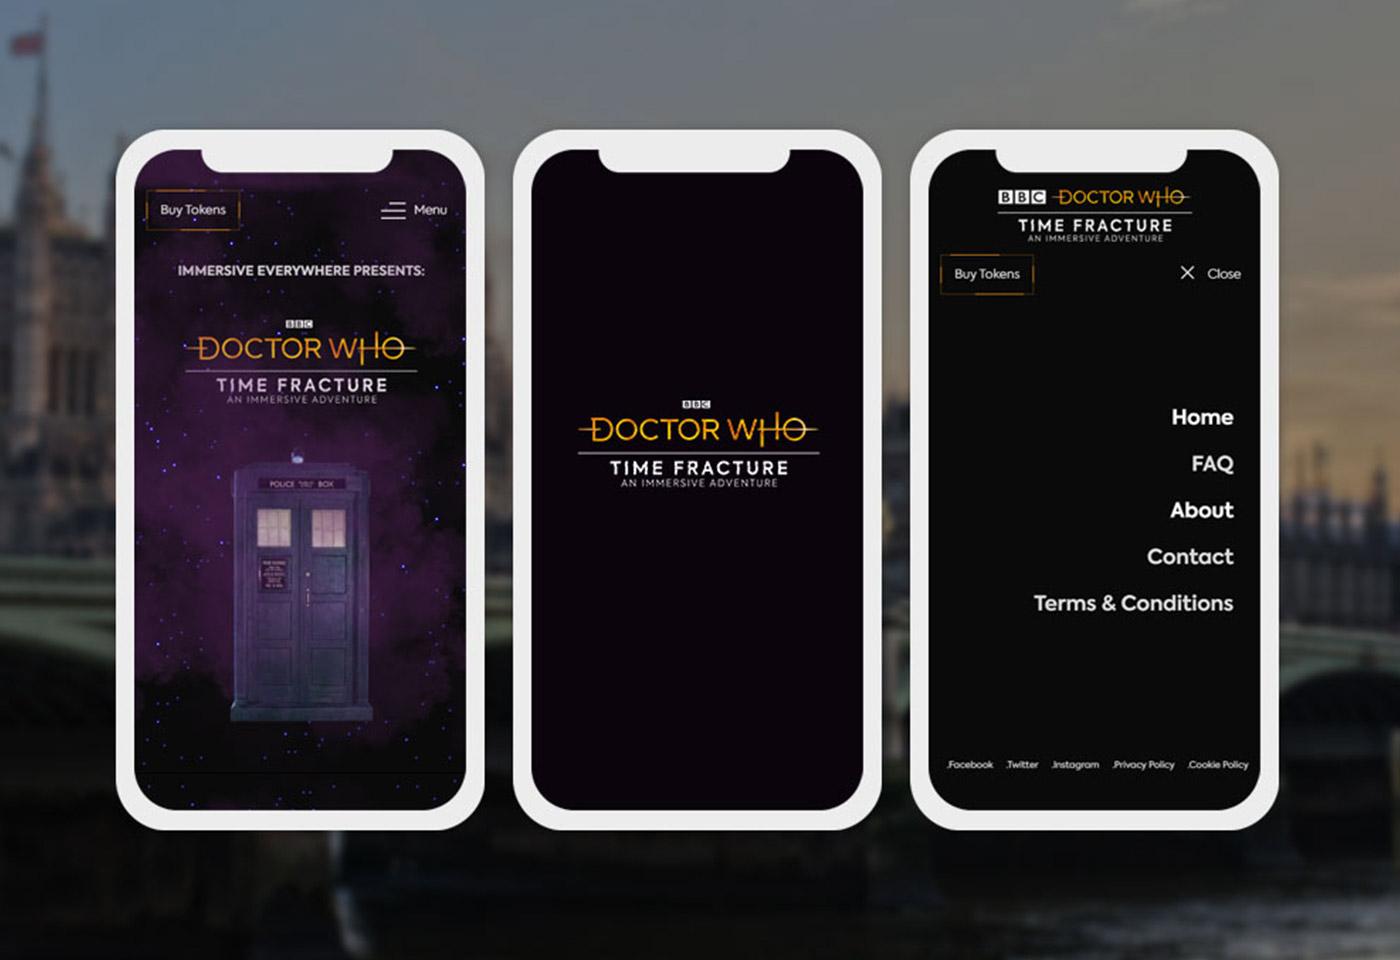 Doctor Who Immersive Everywhere Coming Soon - Weignyte